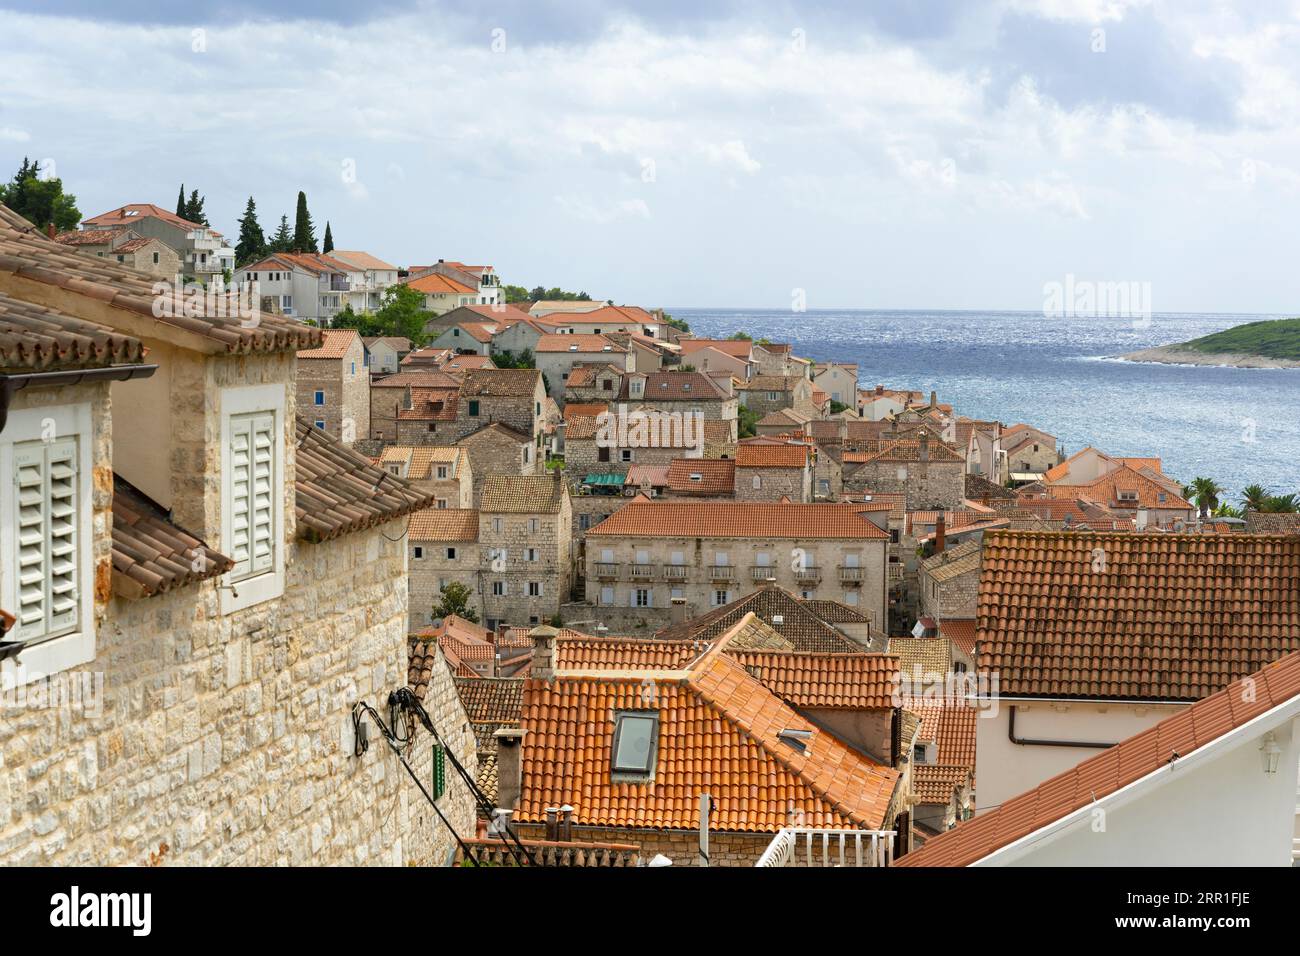 Croatia Hvar Island rooftop view over port bay tiled roofs of old city town from Bistro Pizzeria Mizarola terrace Adriatic Sea Stock Photo